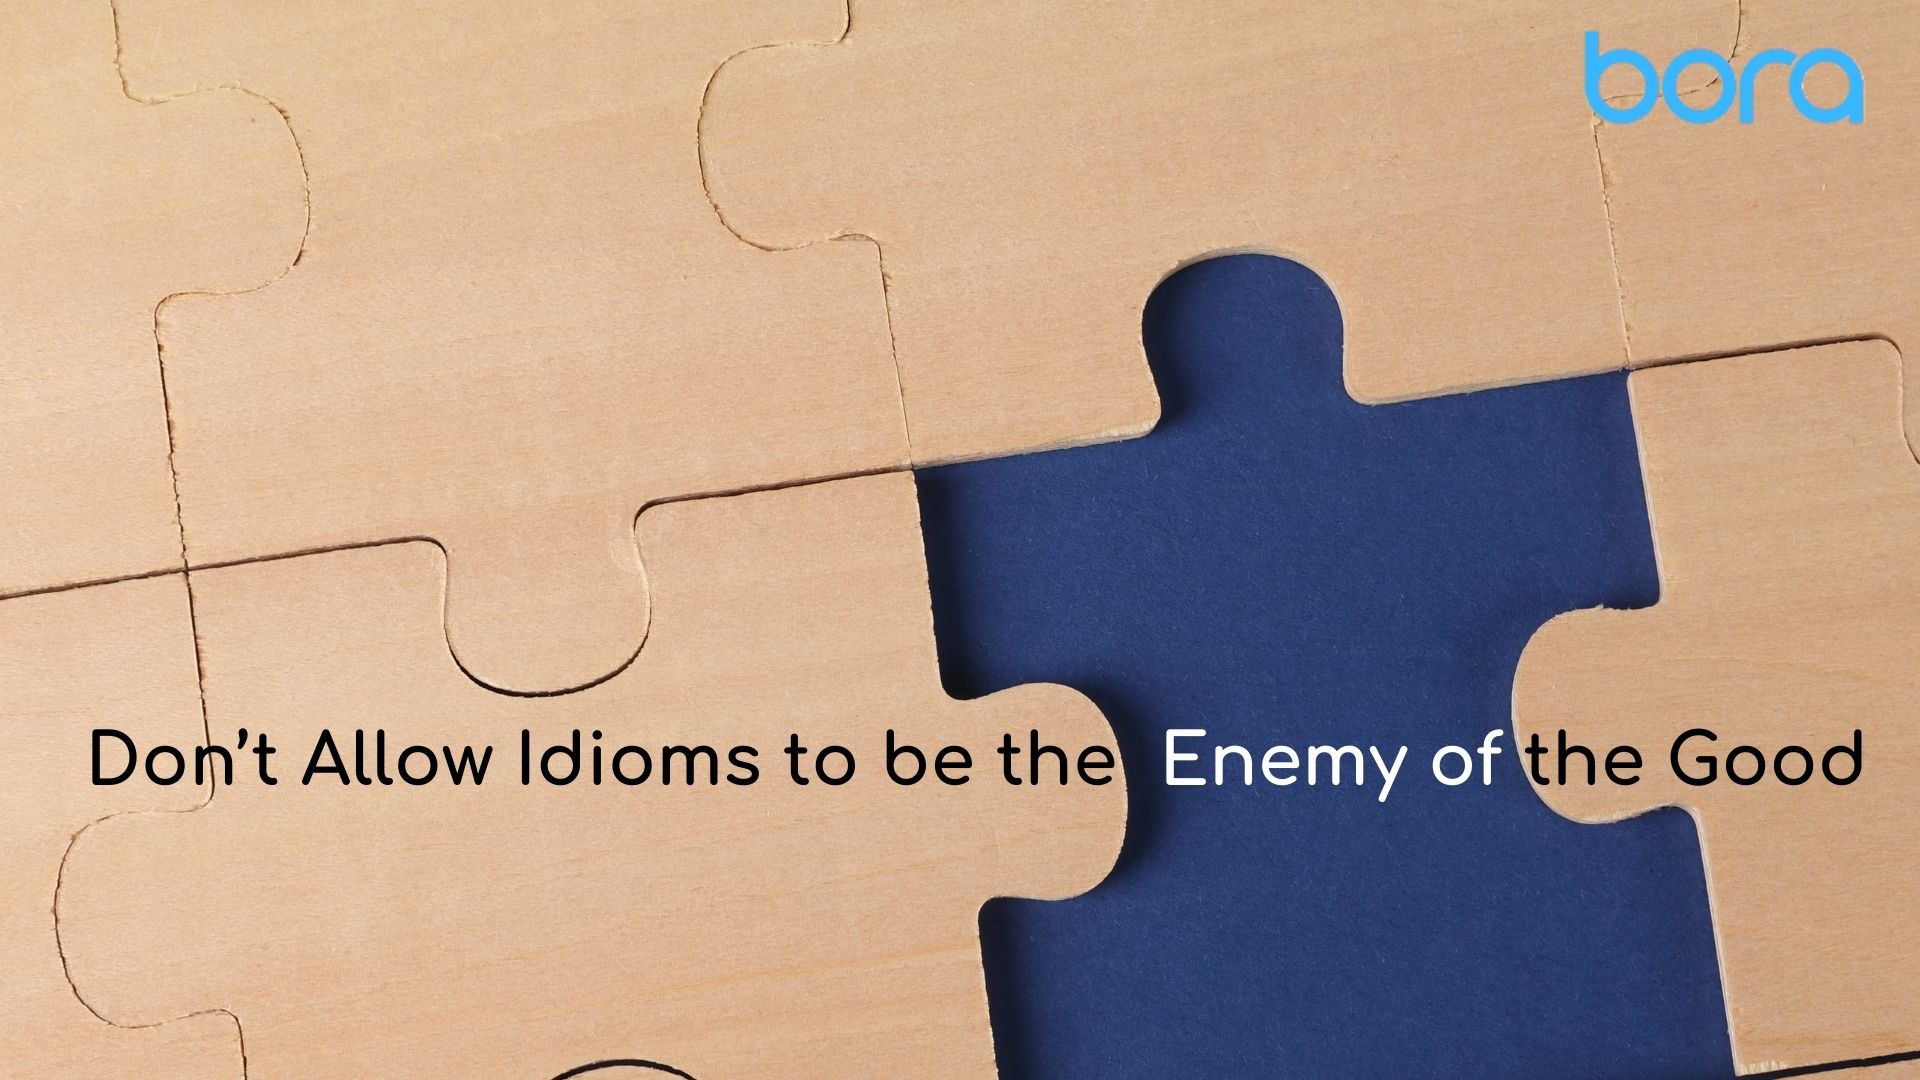 Don’t Allow Idioms to Be the Enemy of the Good